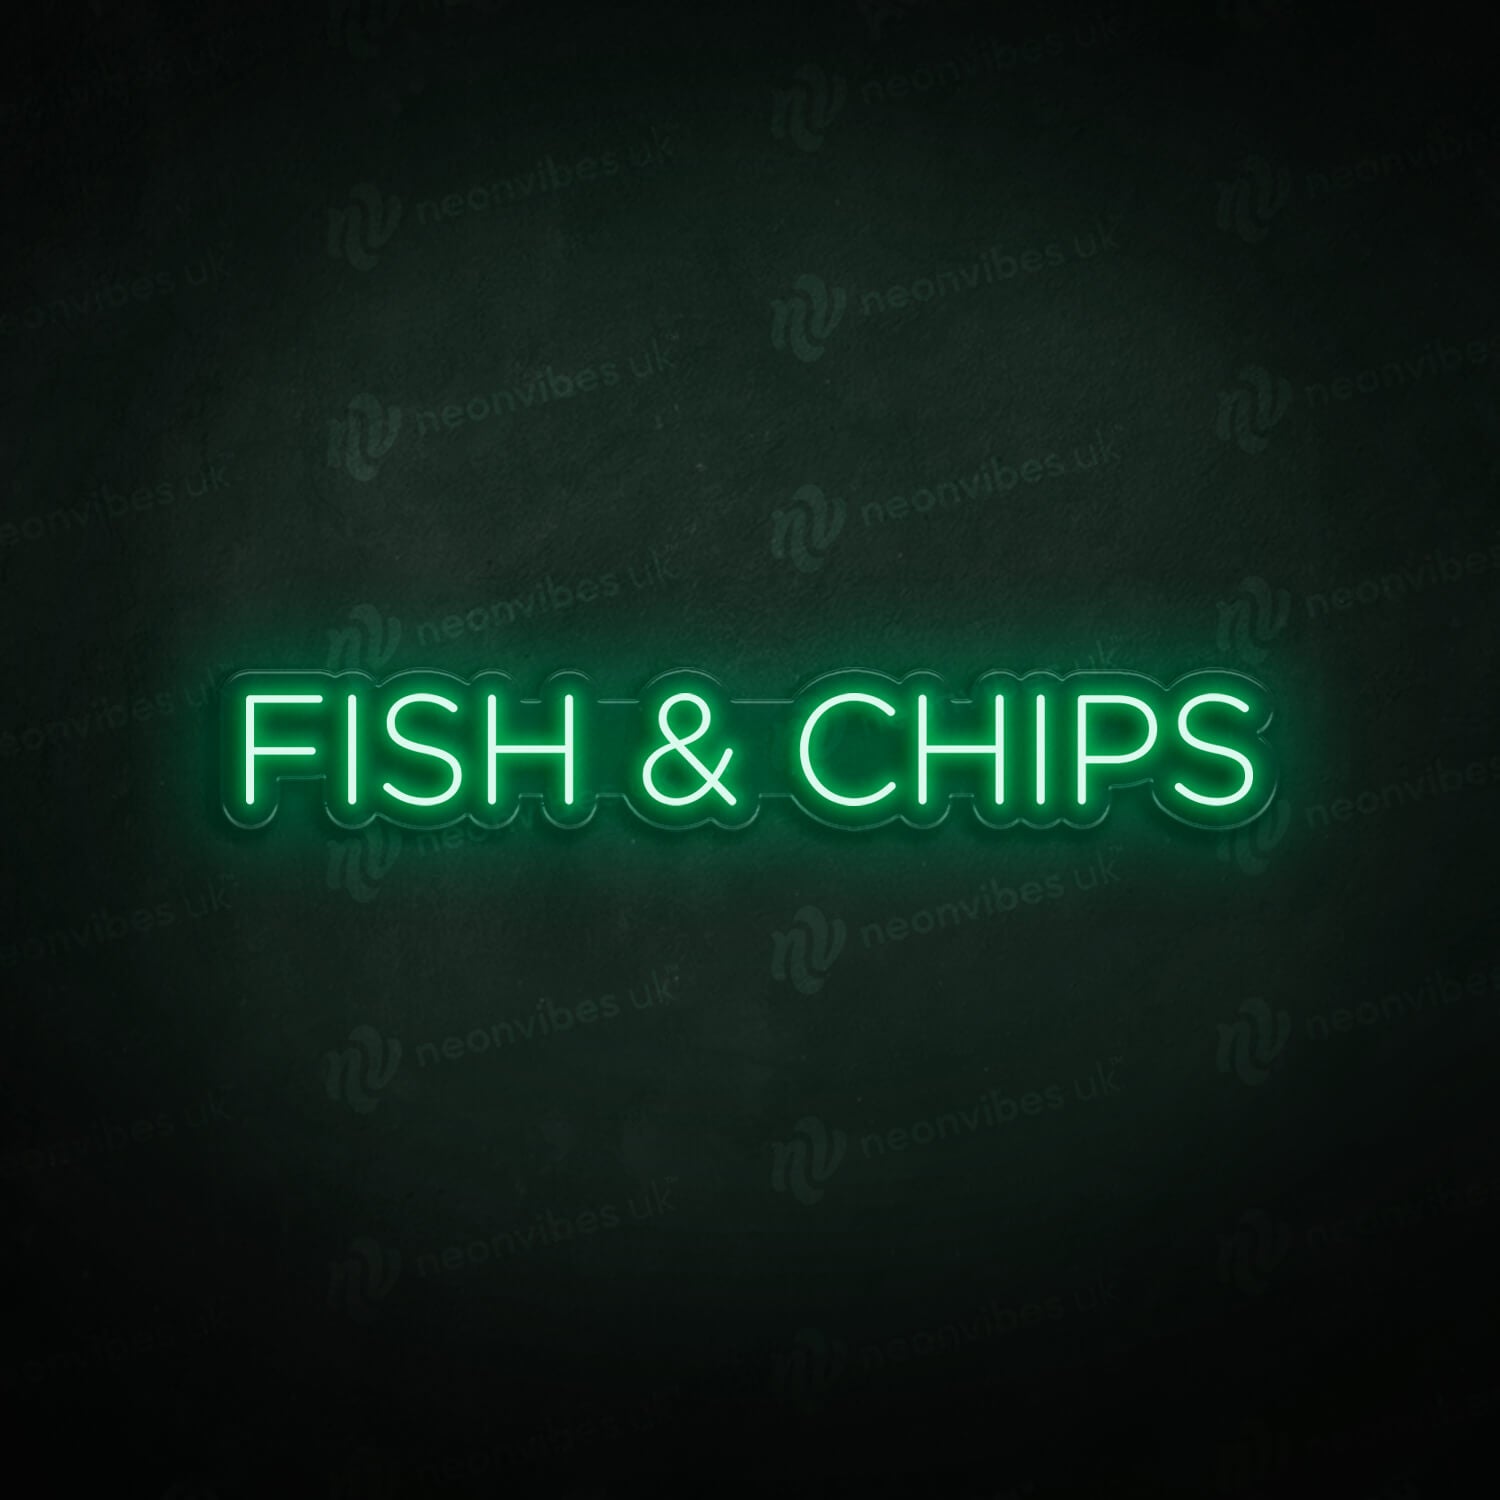 Fish & Chips neon sign